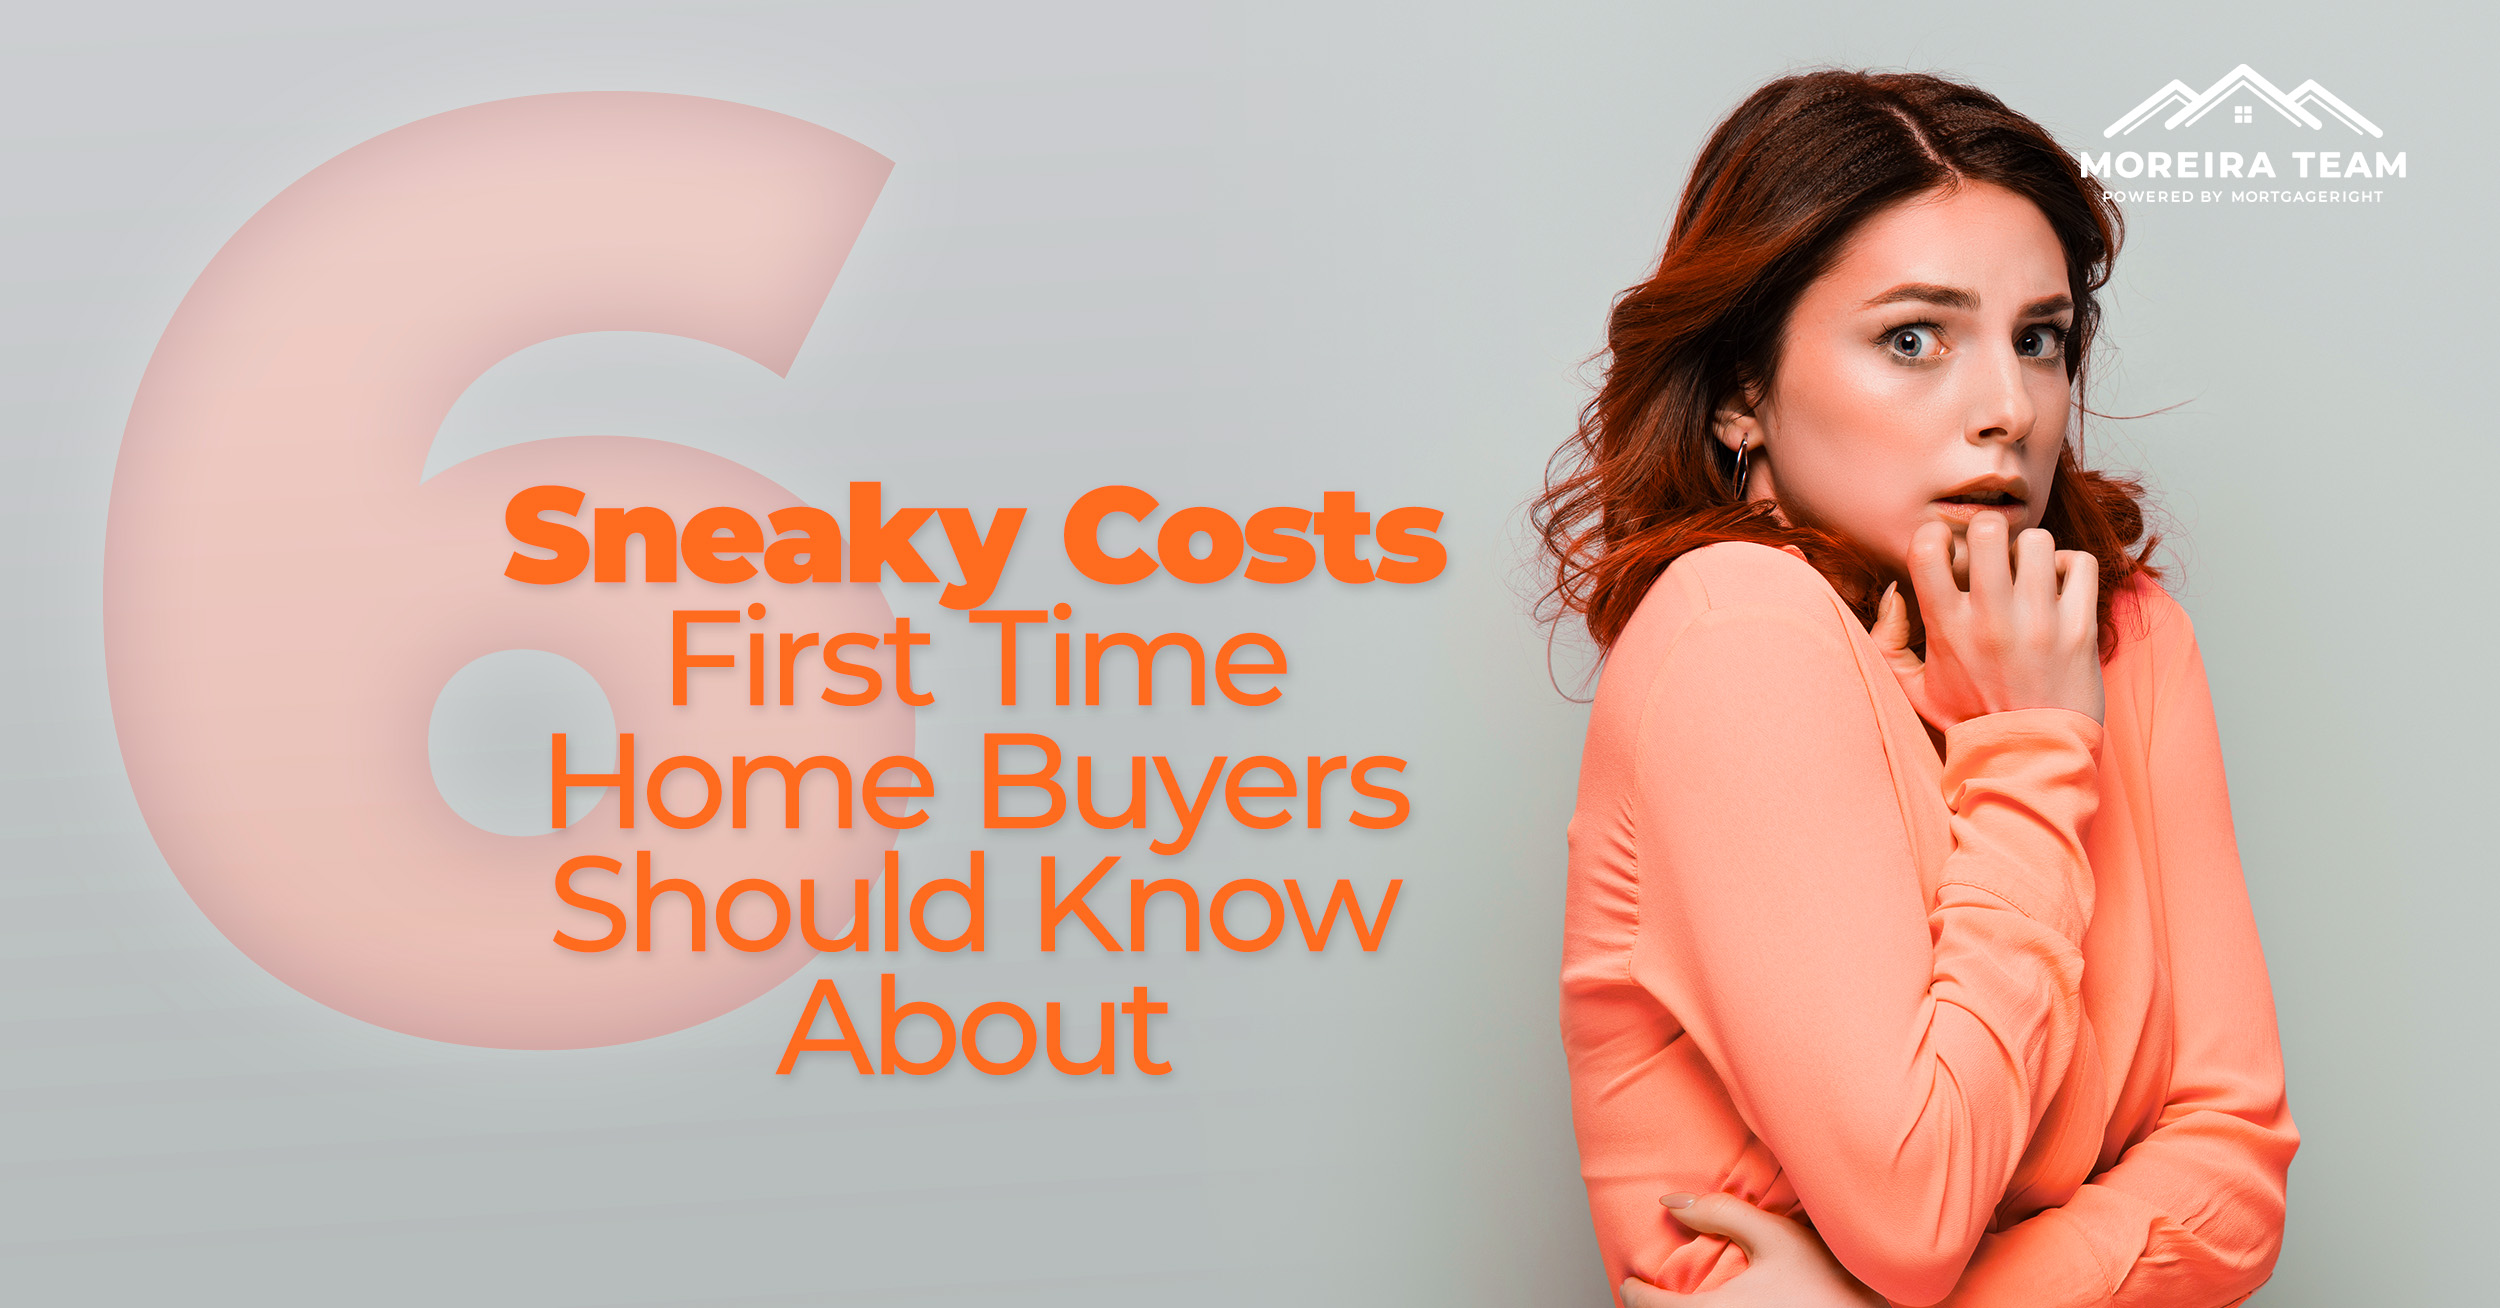 6 Sneaky Costs First Time Home Buyers Should Know About